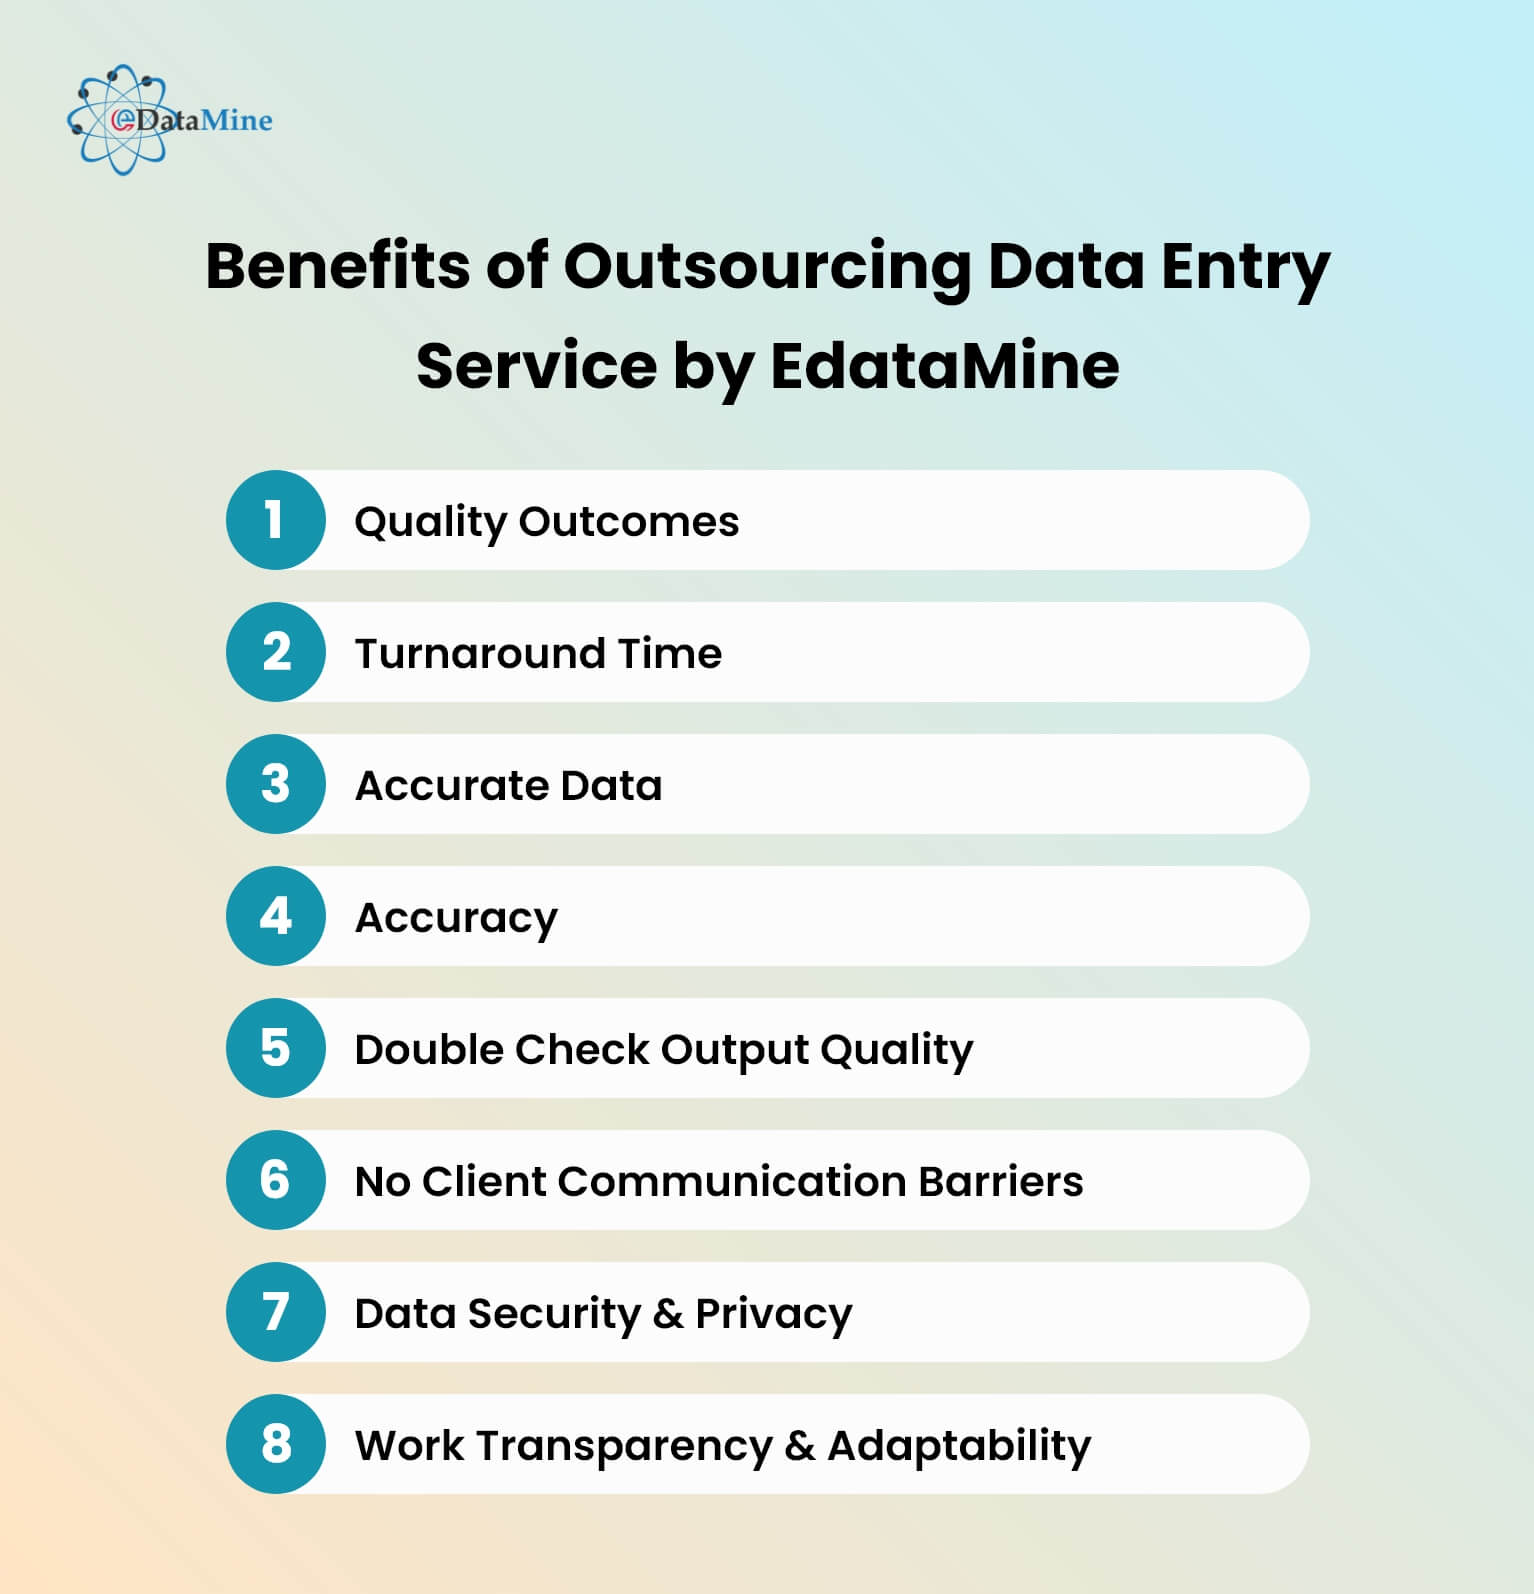 Benefits of Outsourcing Data Entry Service by EdataMine